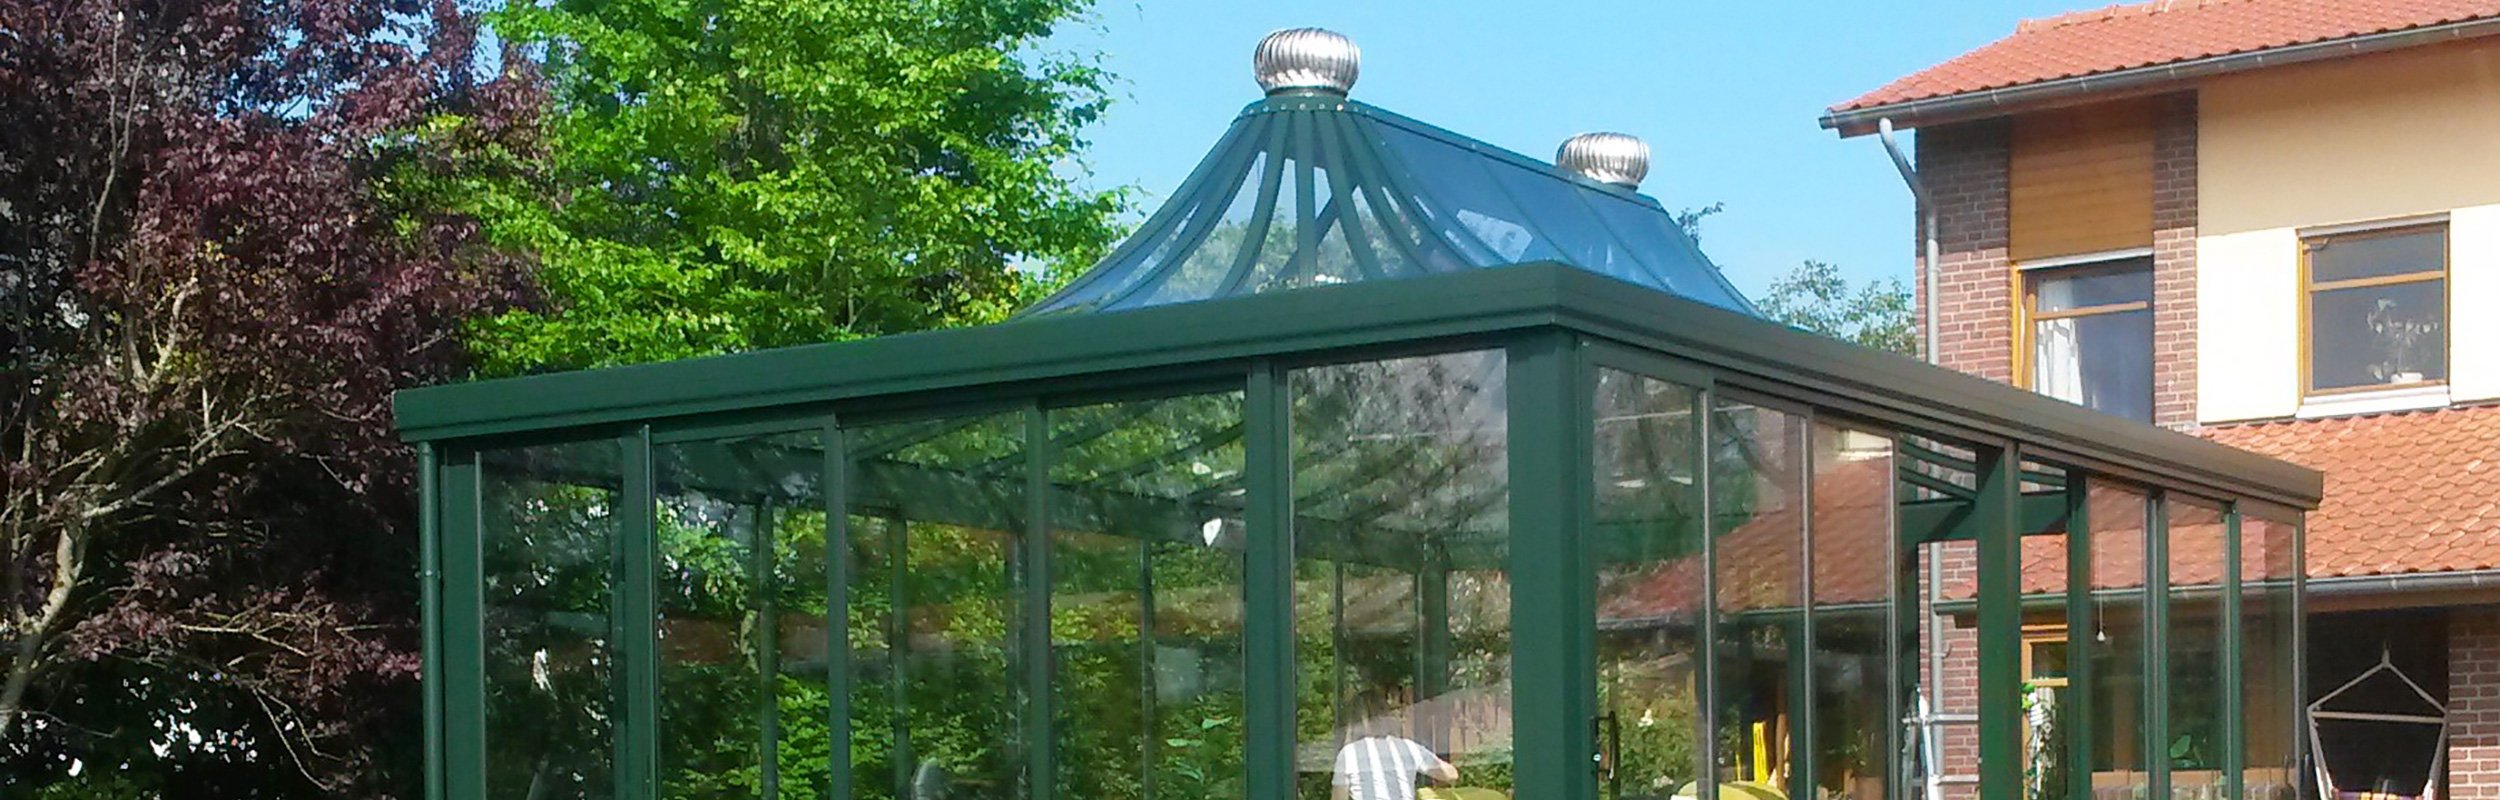 Pagoda roof as an uninsulated conservatory in the garden